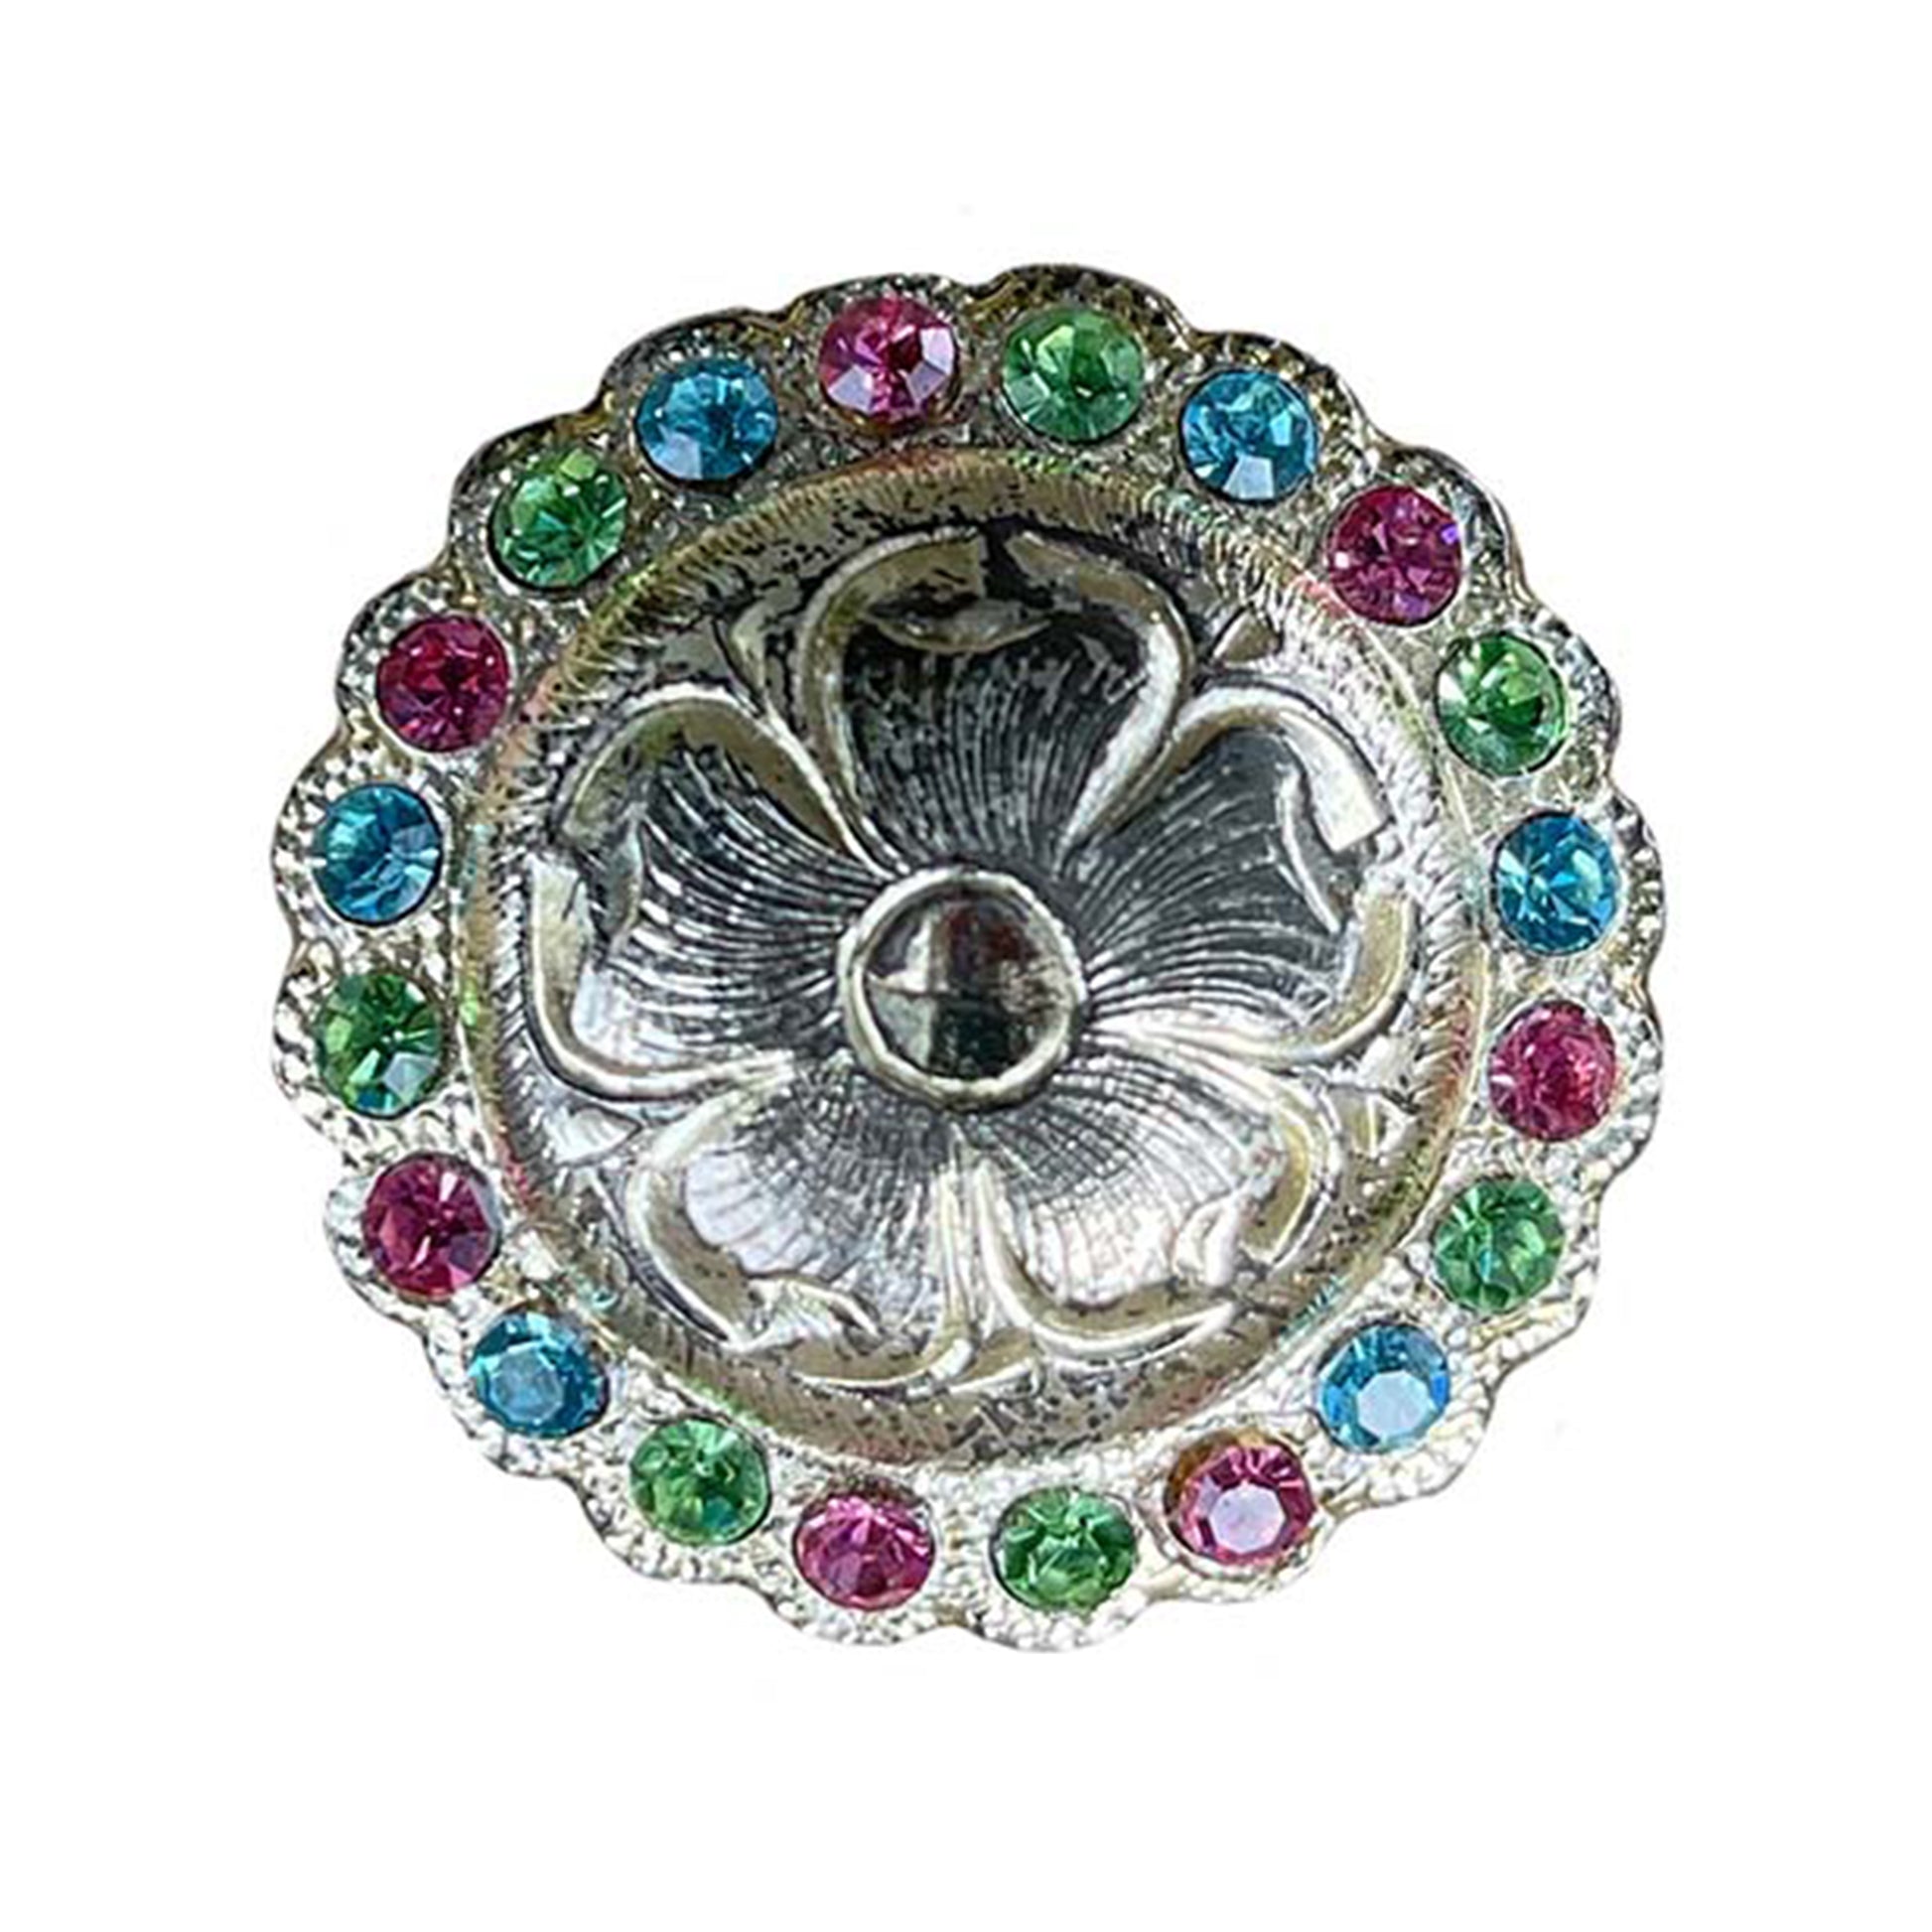 1-1/4" BD Round silver concho with zig-zag and floral center, multicolored crystals around edge (set of 4). 